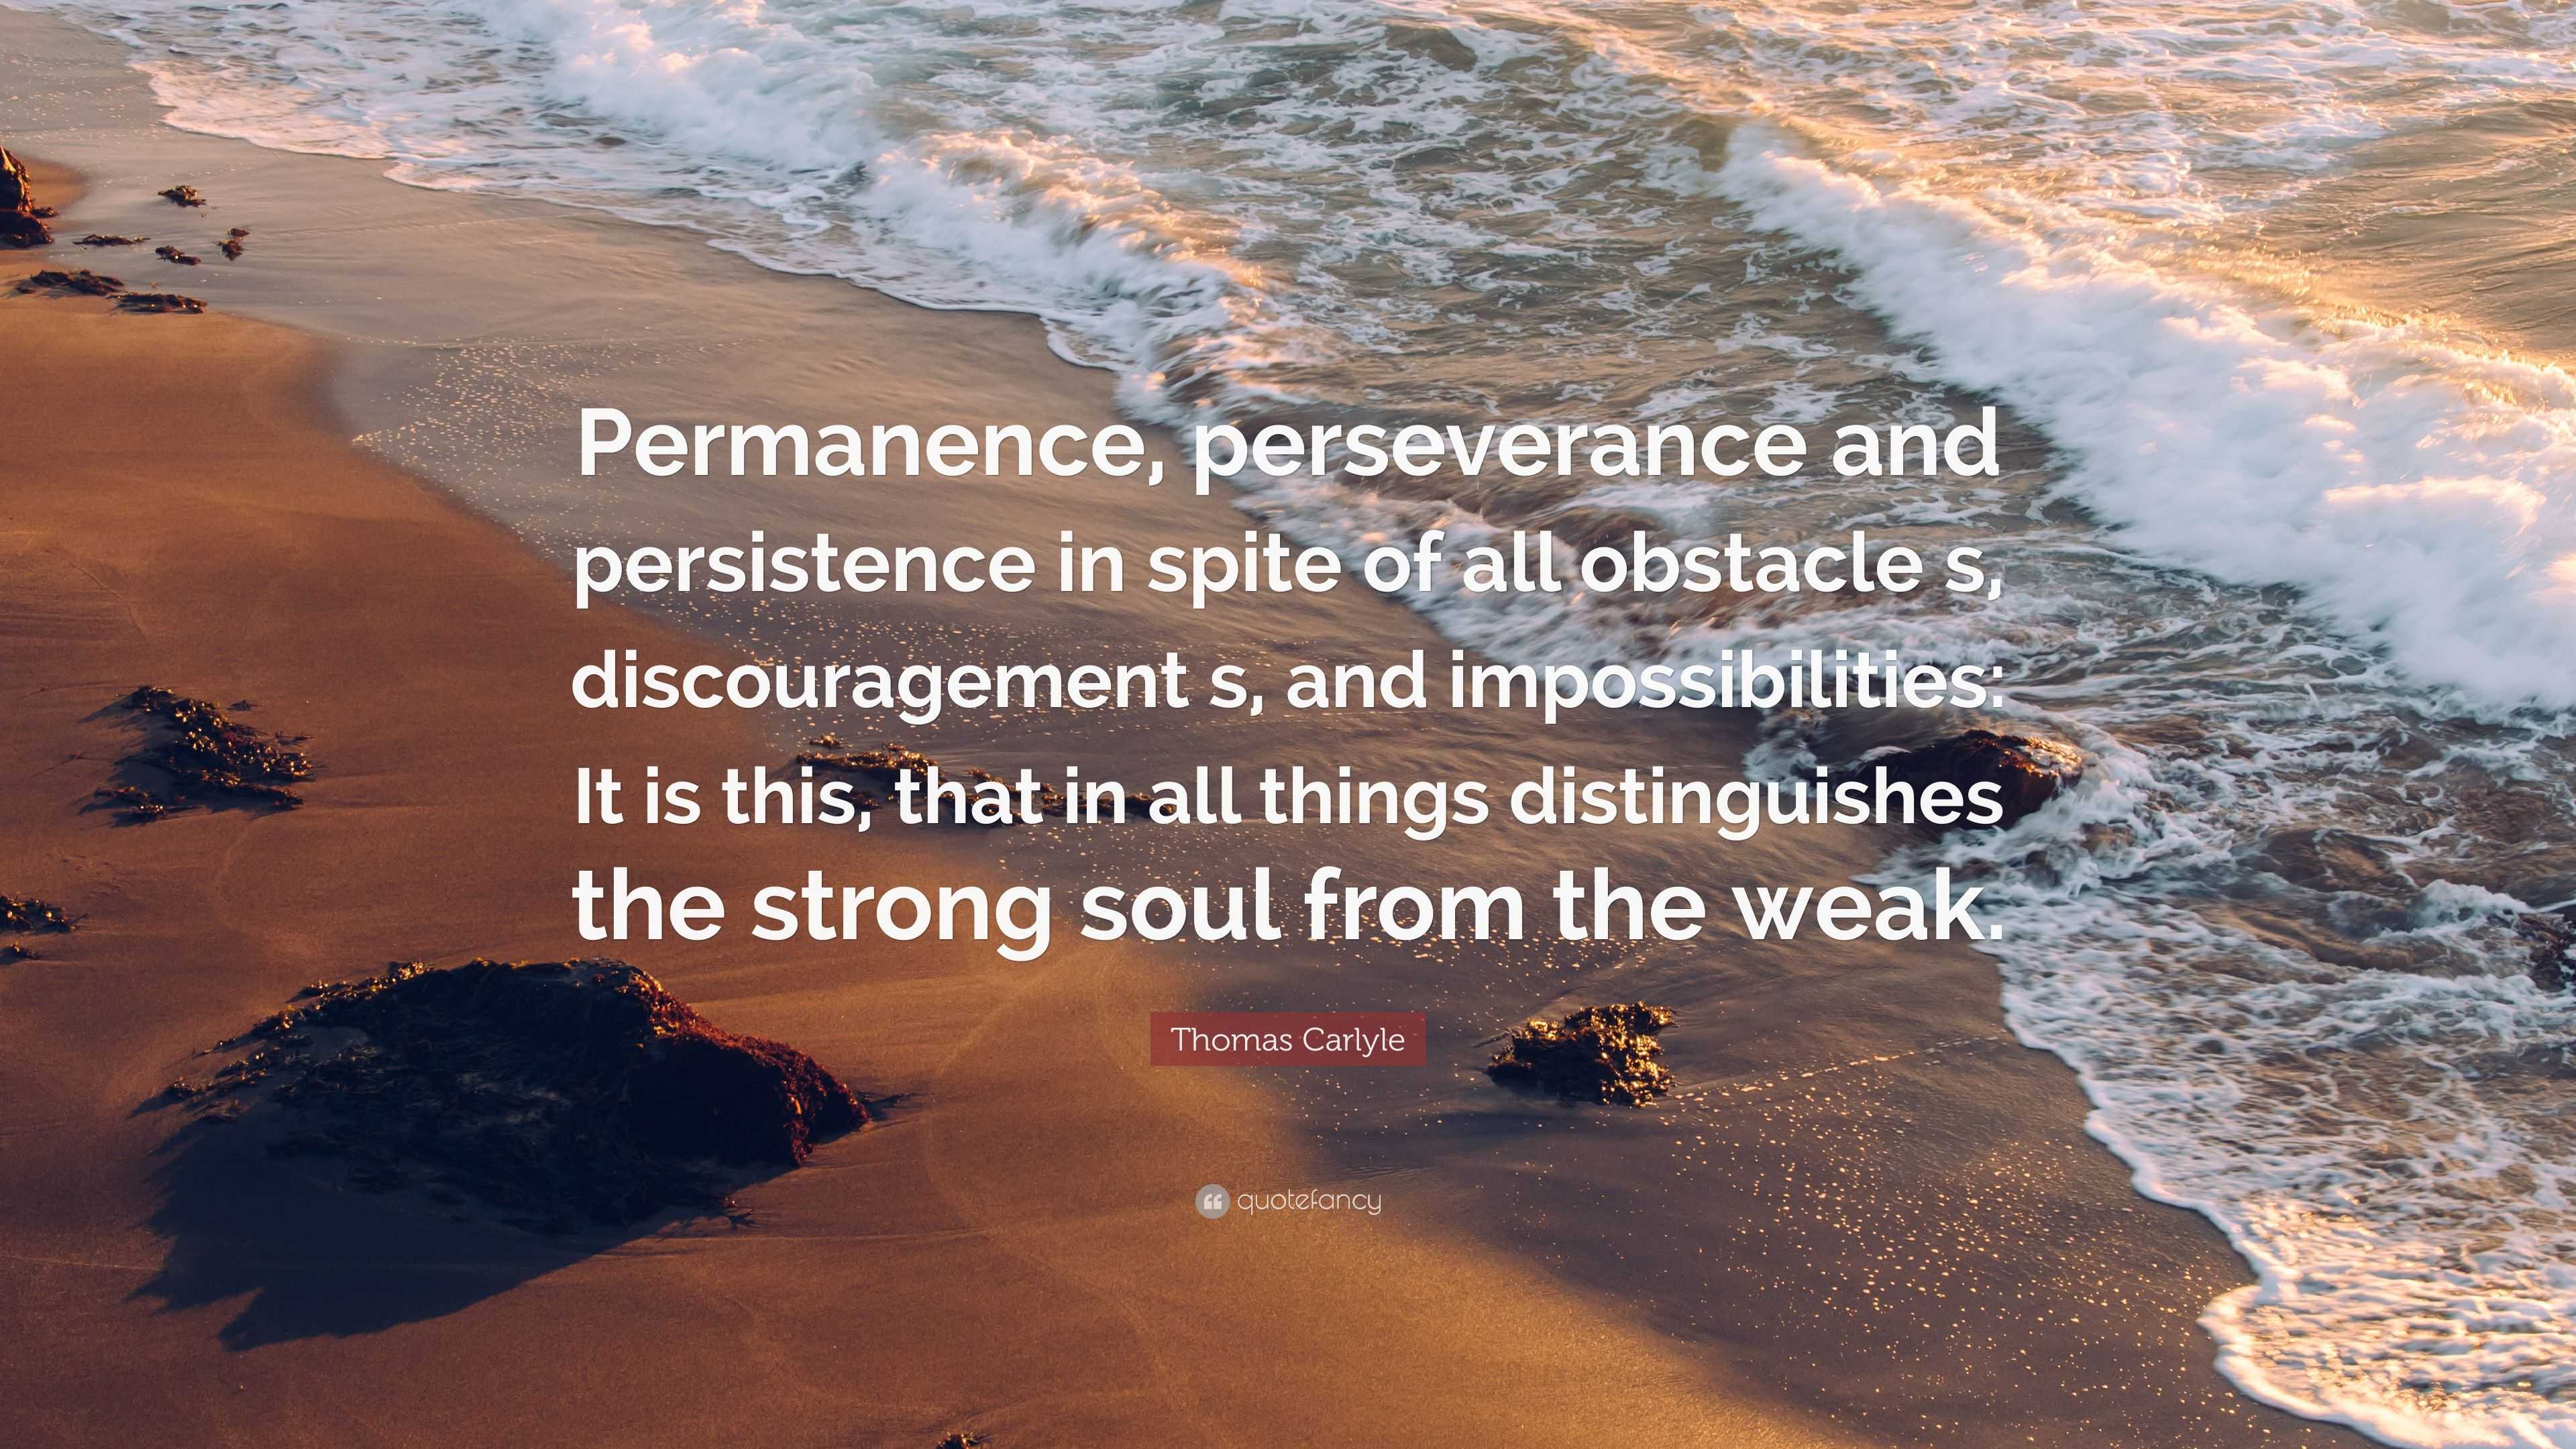 Thomas Carlyle Quote: “Permanence, perseverance and persistence in